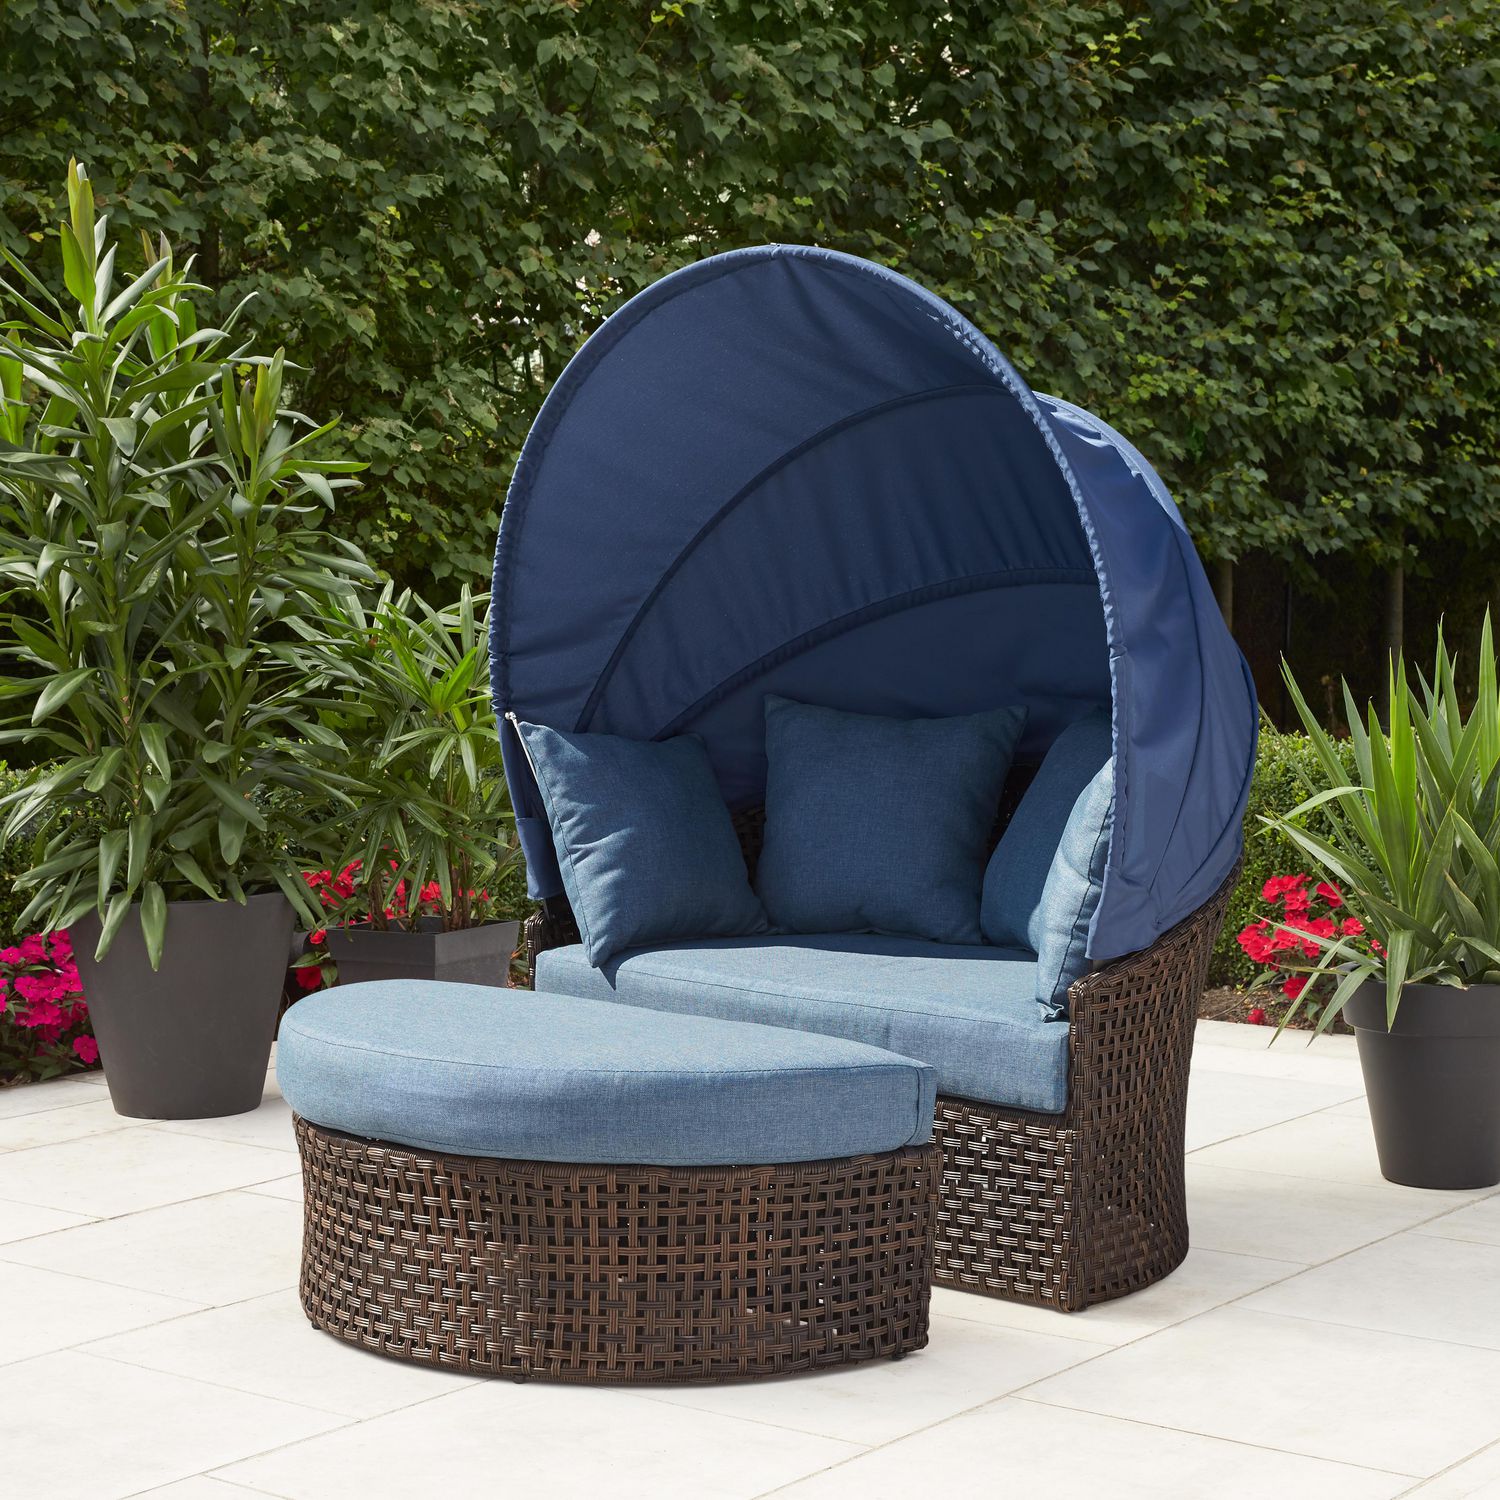 Hometrends Tuscany Ii Canopy Day Bed, Outdoor Daybeds With Canopy Canada